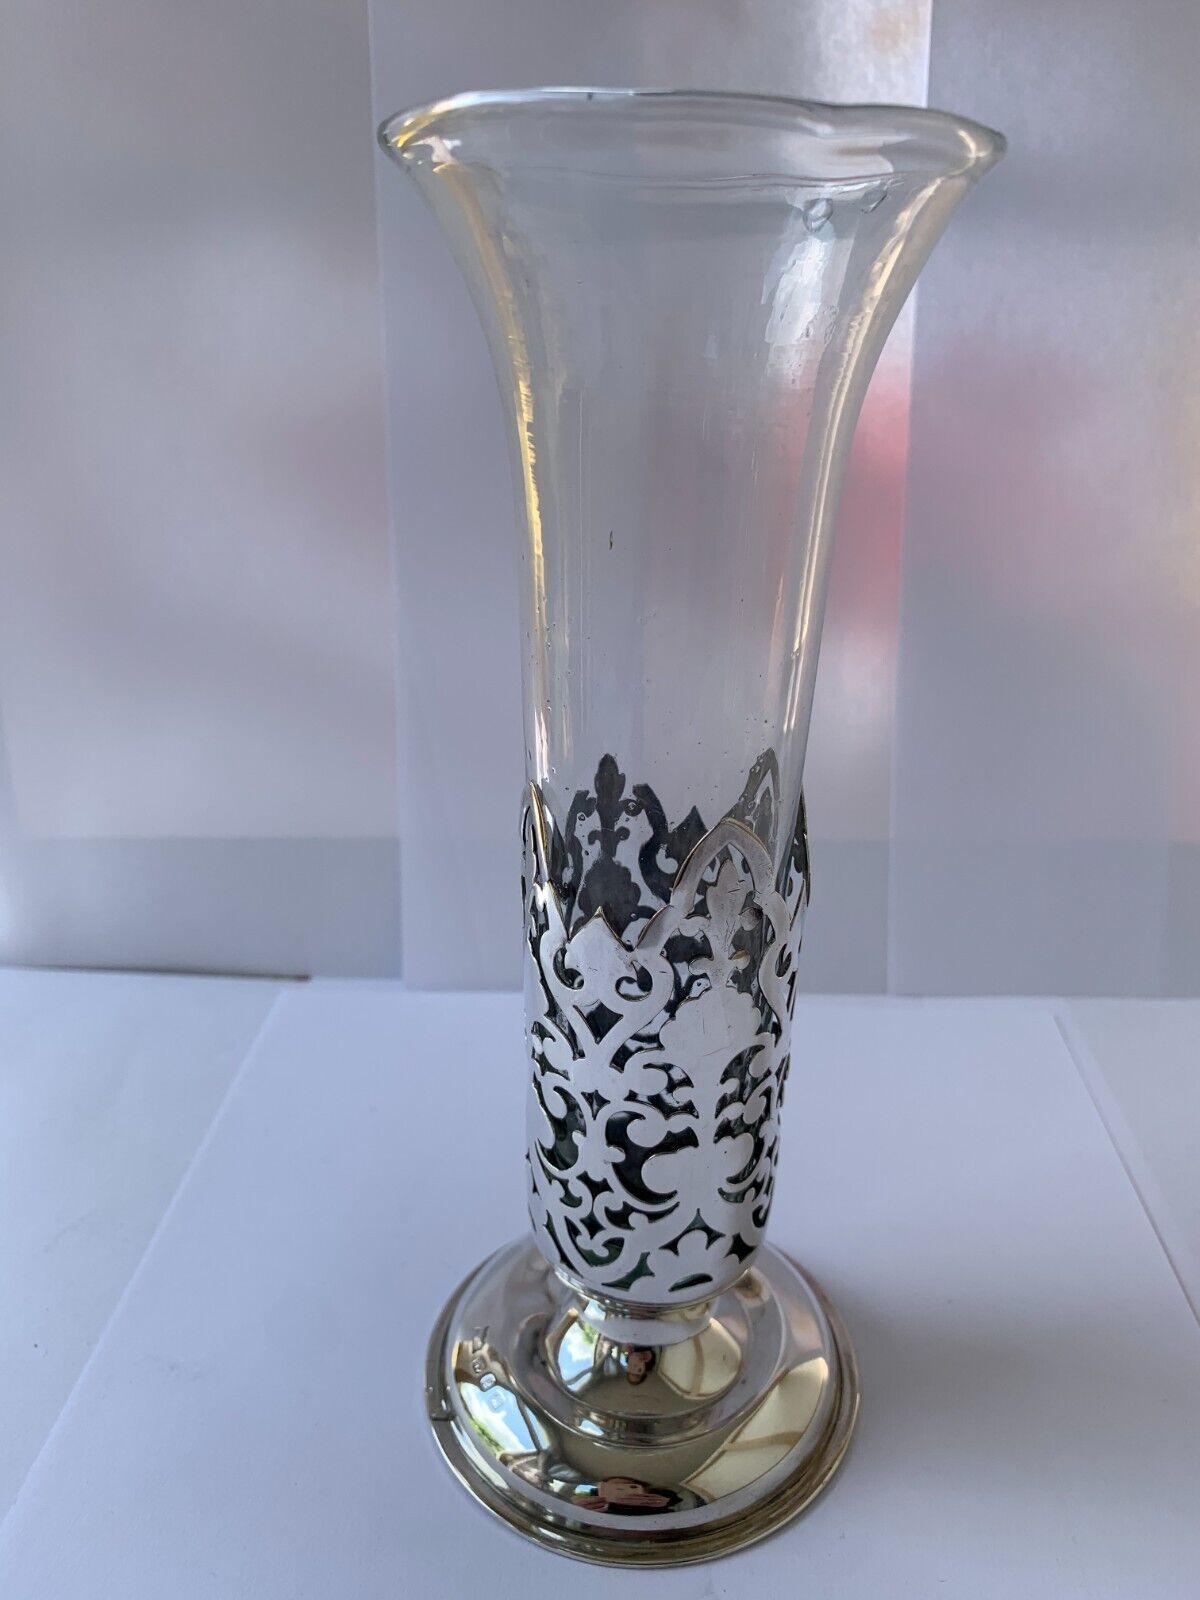 This is a beautiful pierced sterling silver vase with a round pedestal base is in good vintage condition. It has a lovely design, sadly a small bit of the silver is missing, this is reflected in the price.
The clear glass is original and in